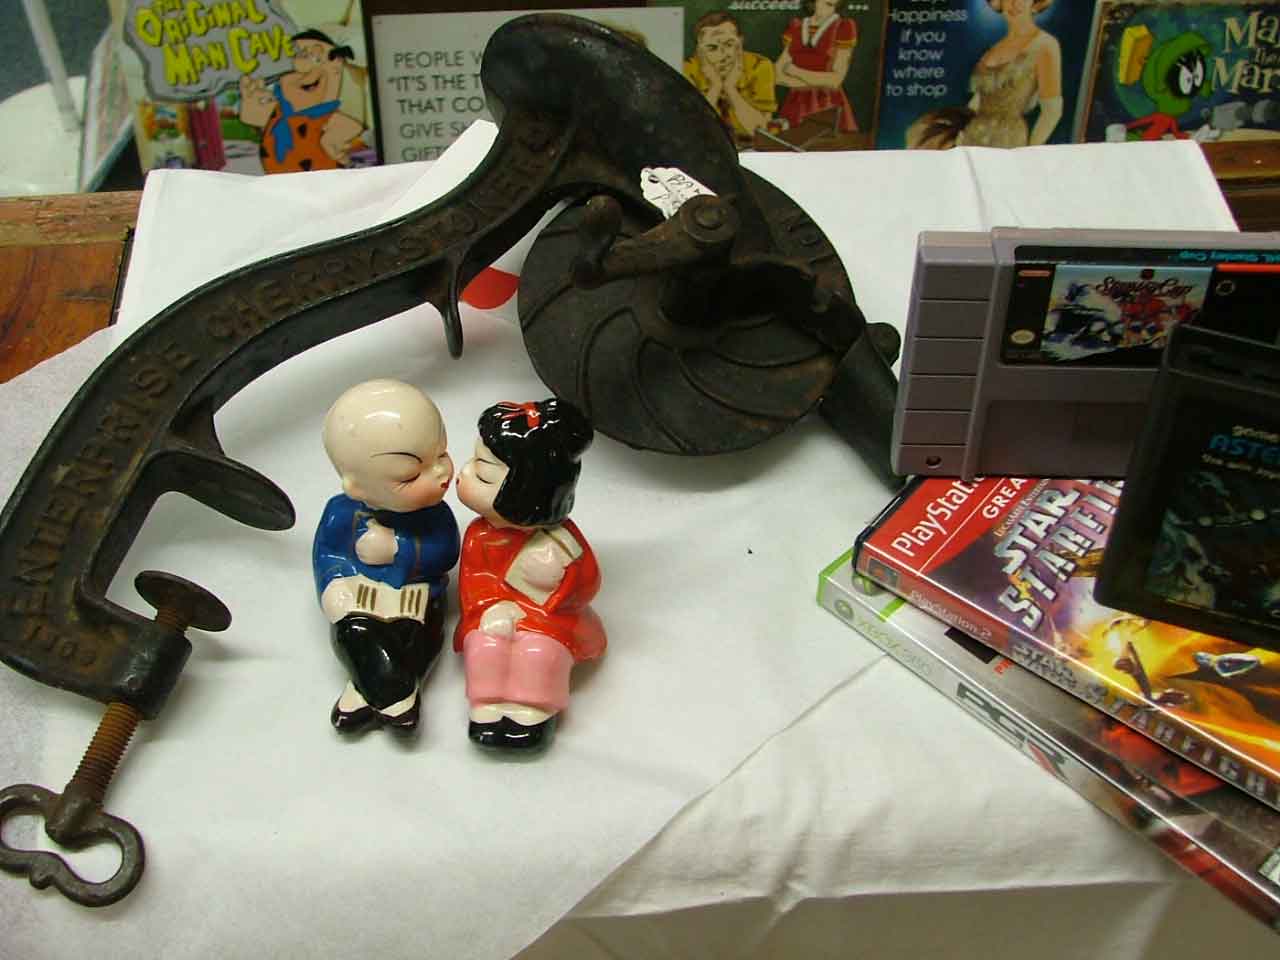 Kissing figurines, cherry pitter, and video games - make for some fun treasures at Bahoukas Antiques 